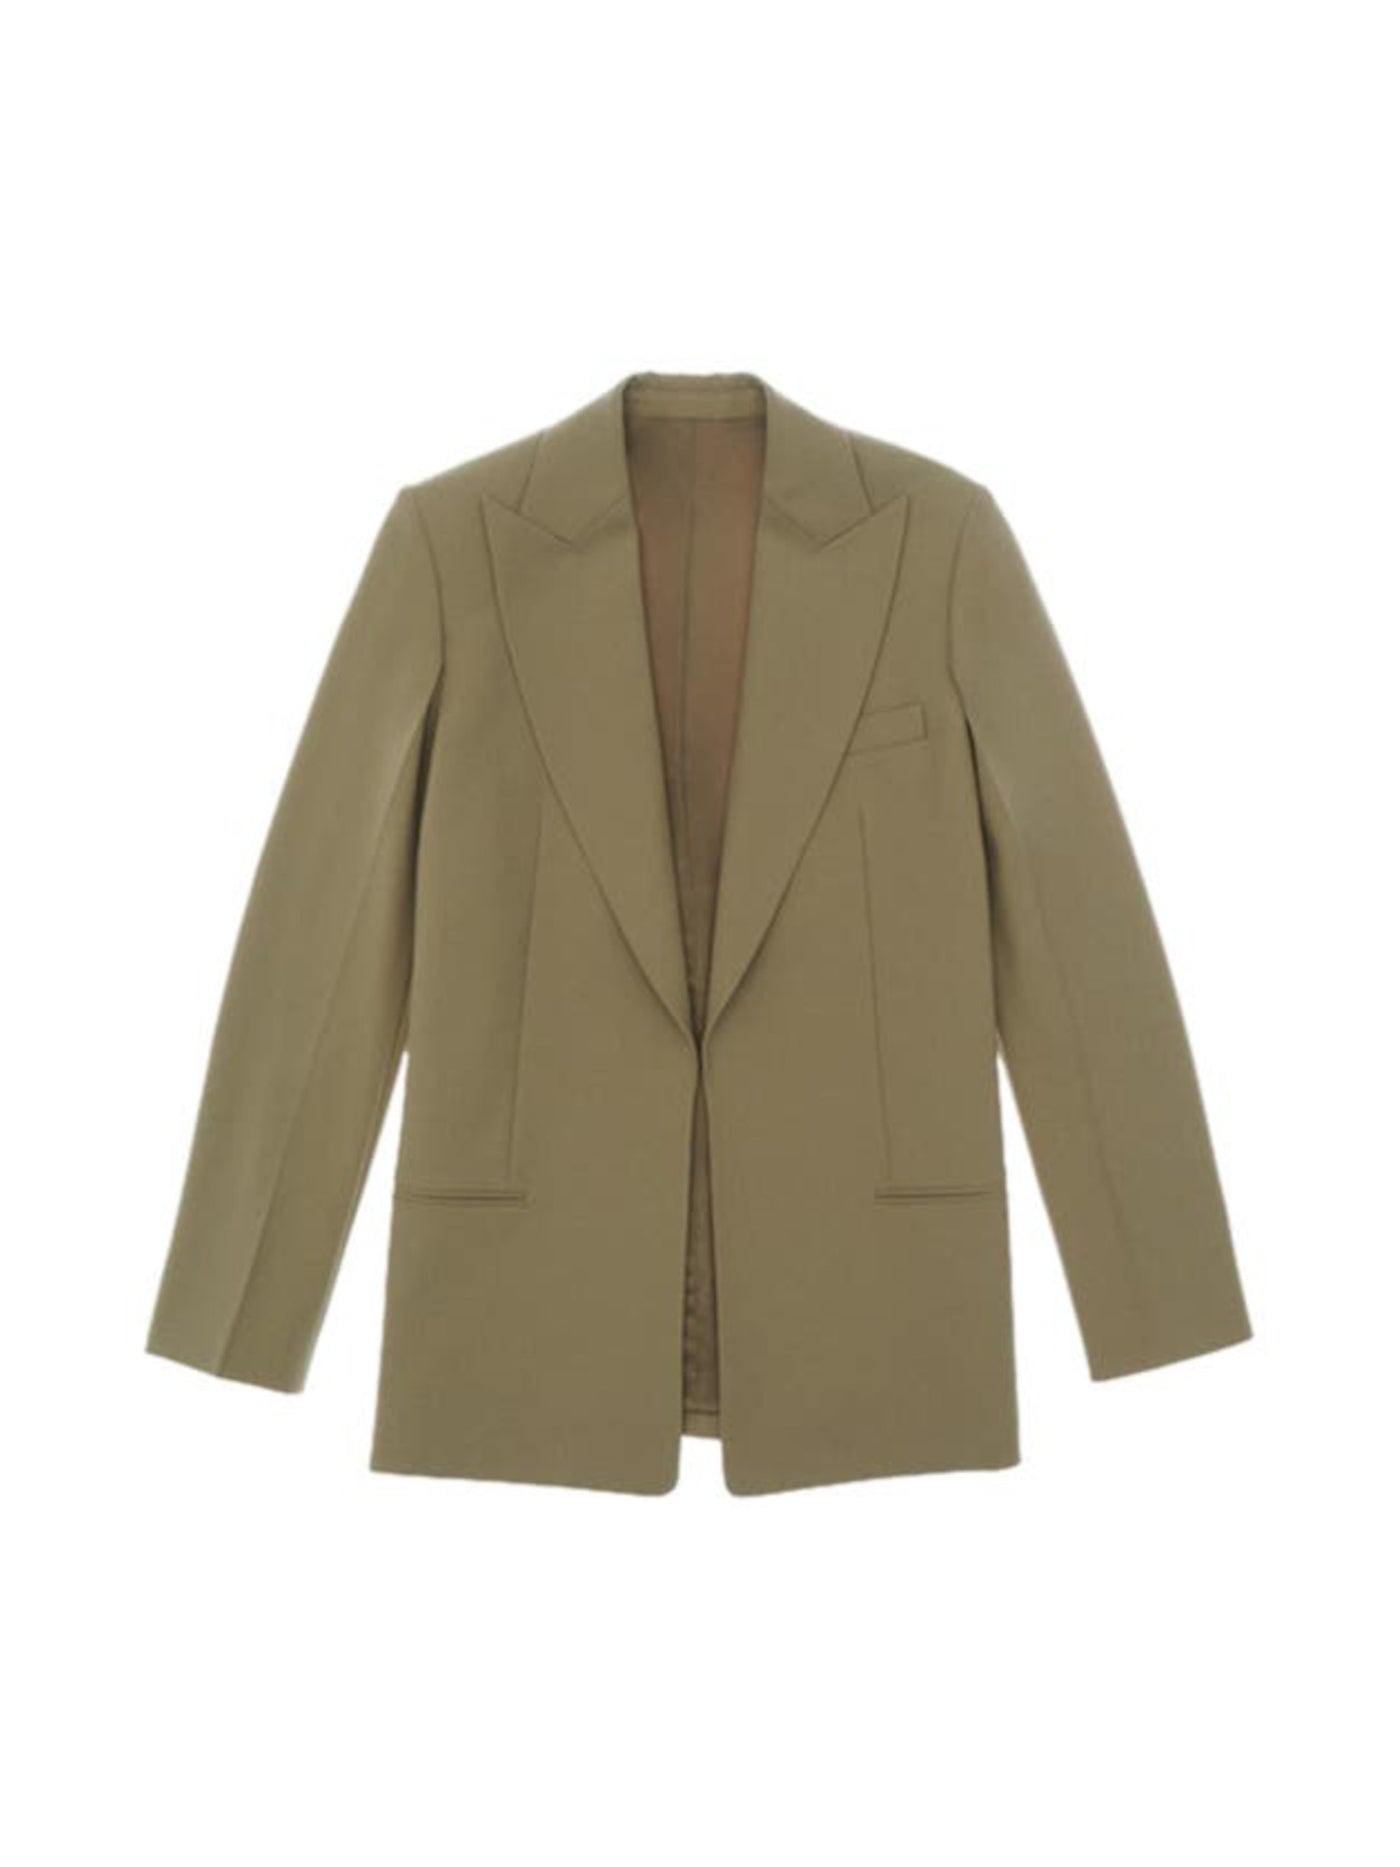 HELMUT LANG Womens Green Pocketed Open Front Notched Lapel Lined Vented Cuffs Wear To Work Blazer Jacket 0